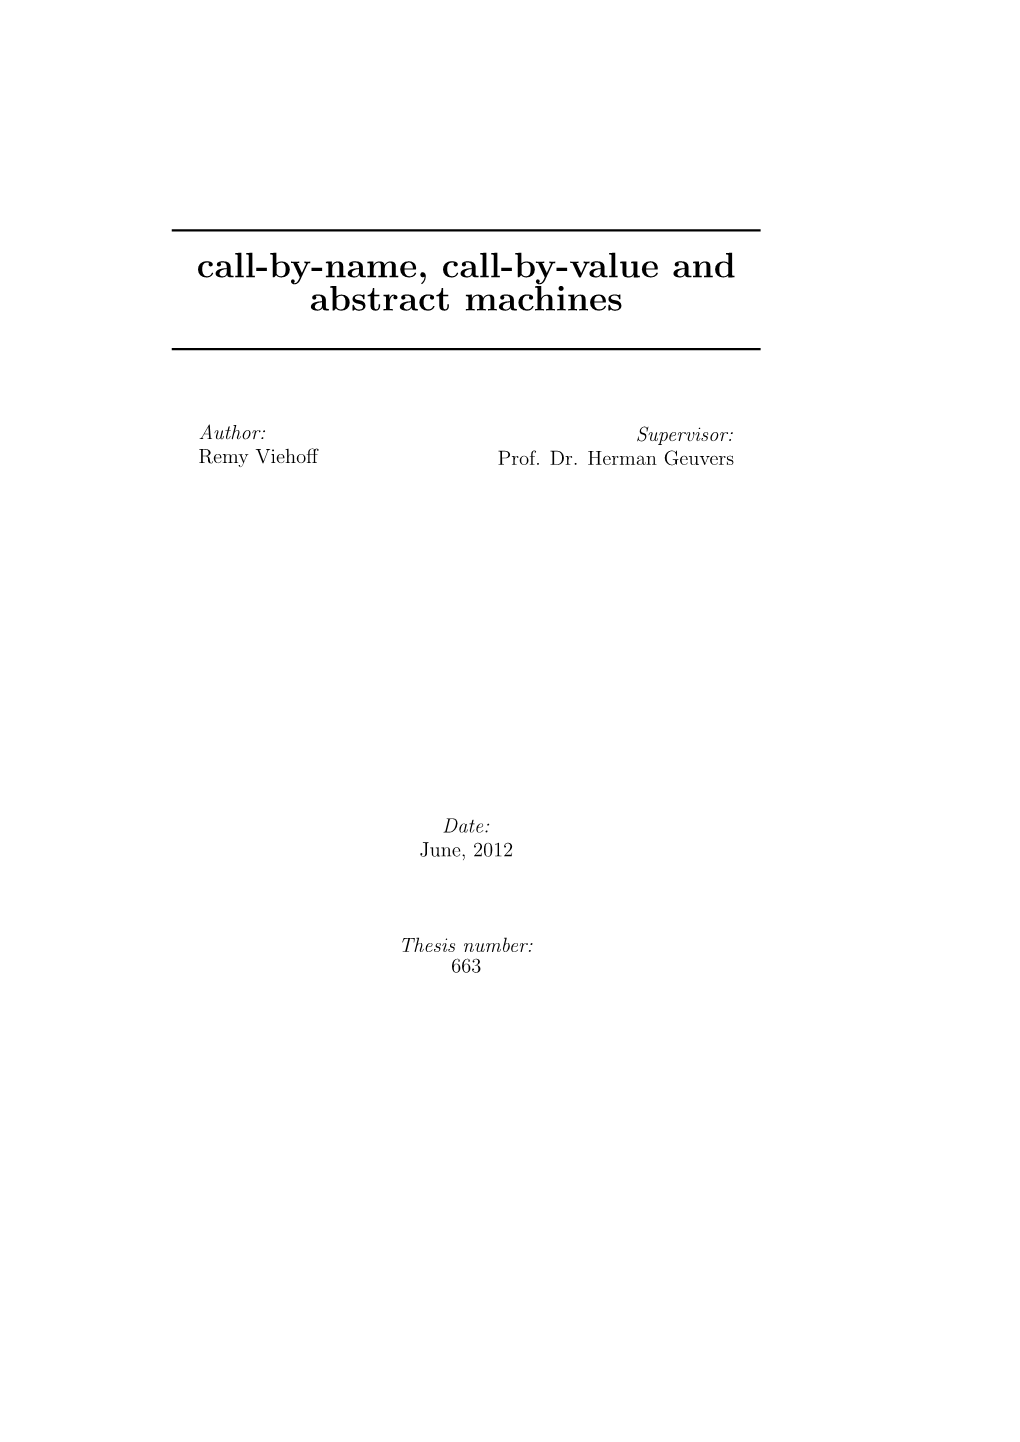 Call-By-Name, Call-By-Value and Abstract Machines